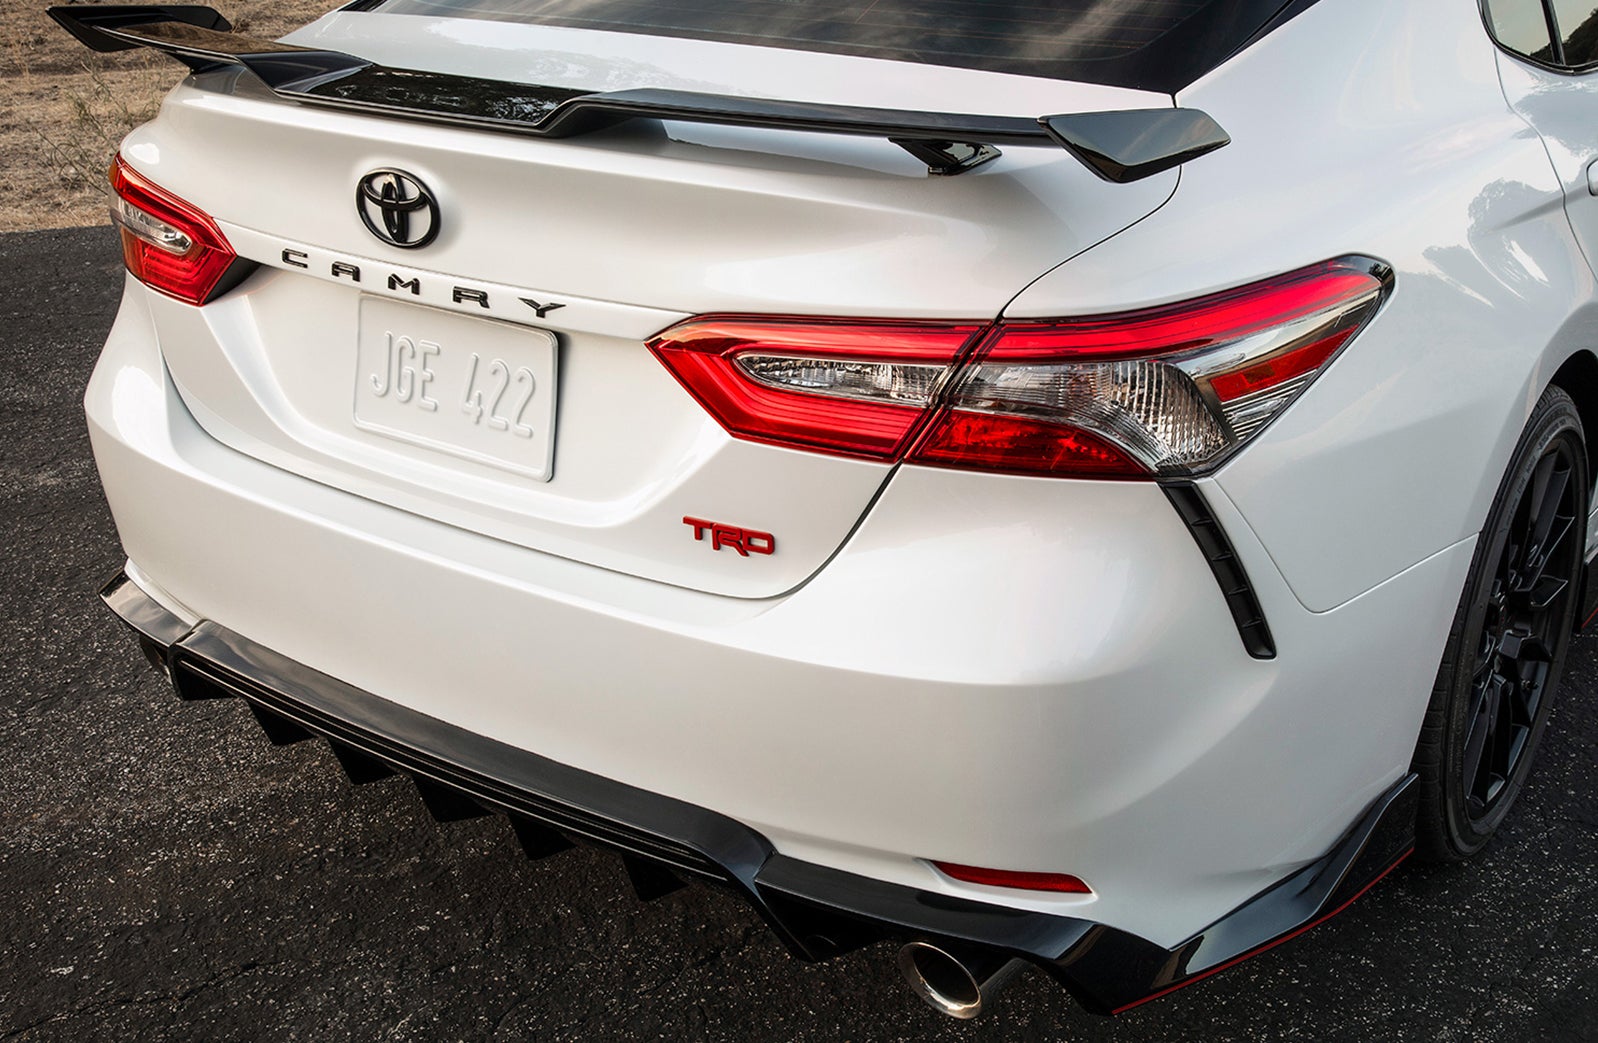 2020 Toyota Camry versus 2020 Honda Accord Comparison at Fiore Toyota | The tail end of the white 2020 Camry